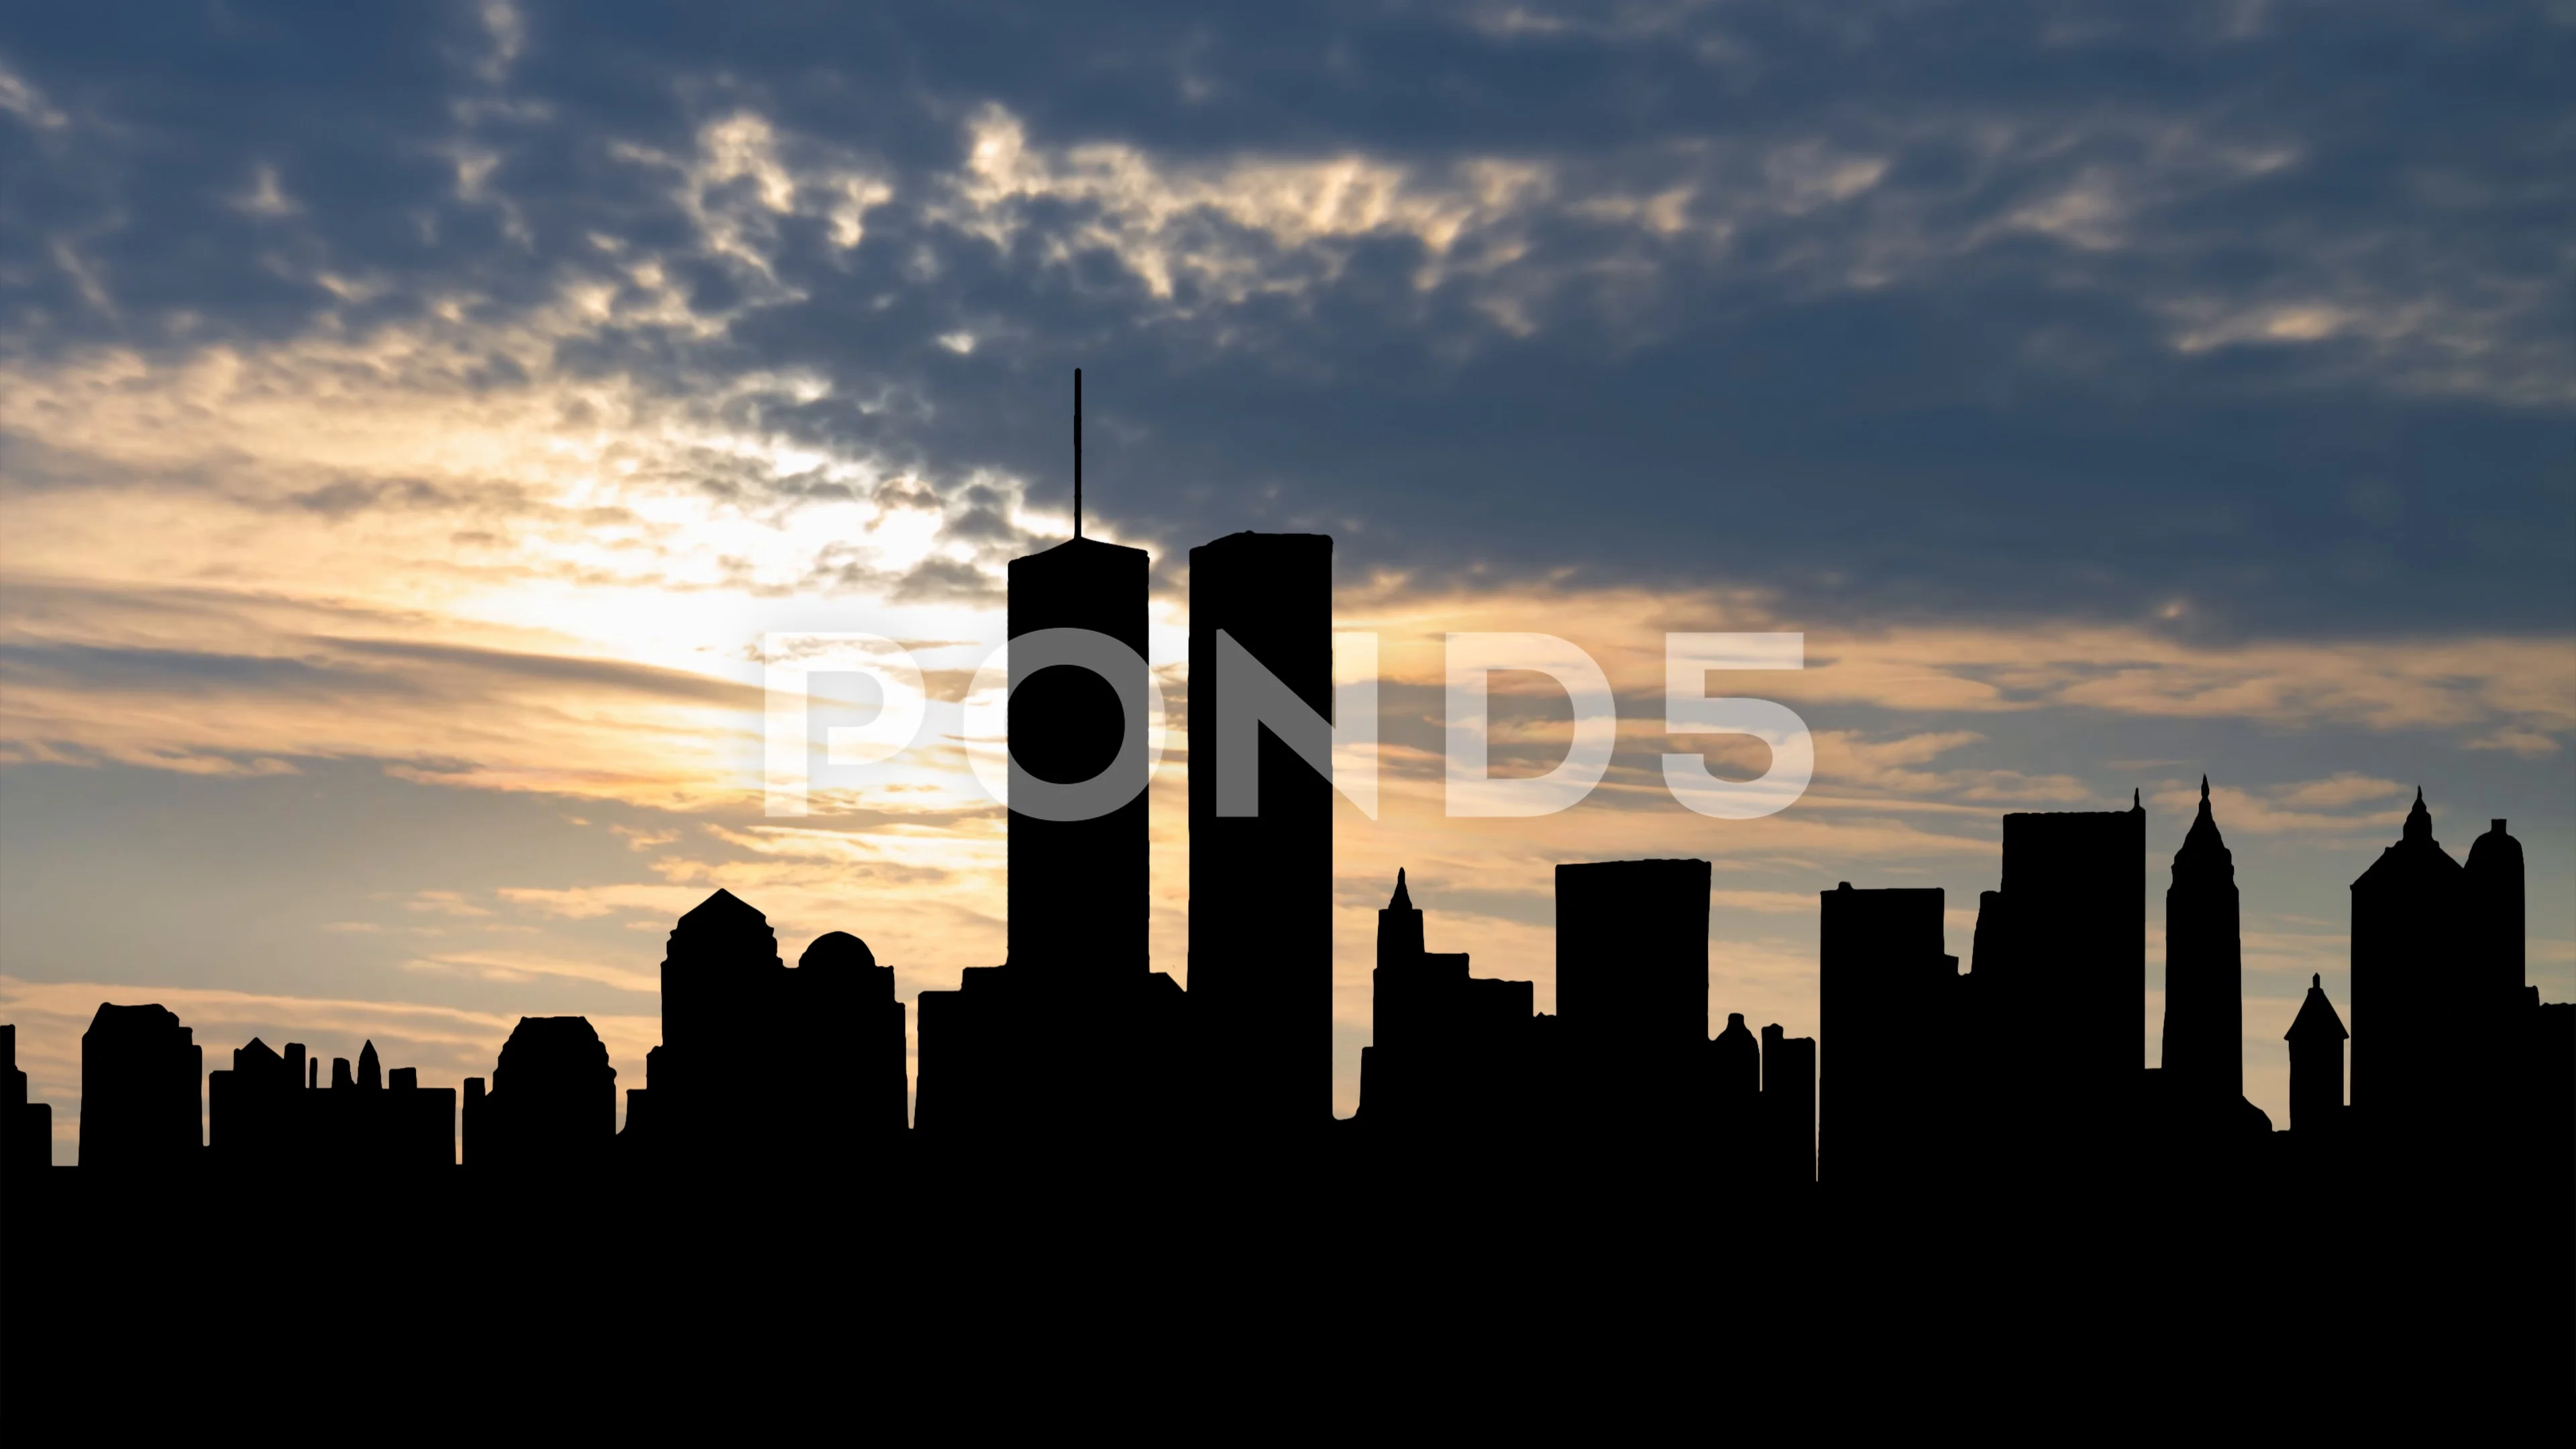 freedom tower silhouette